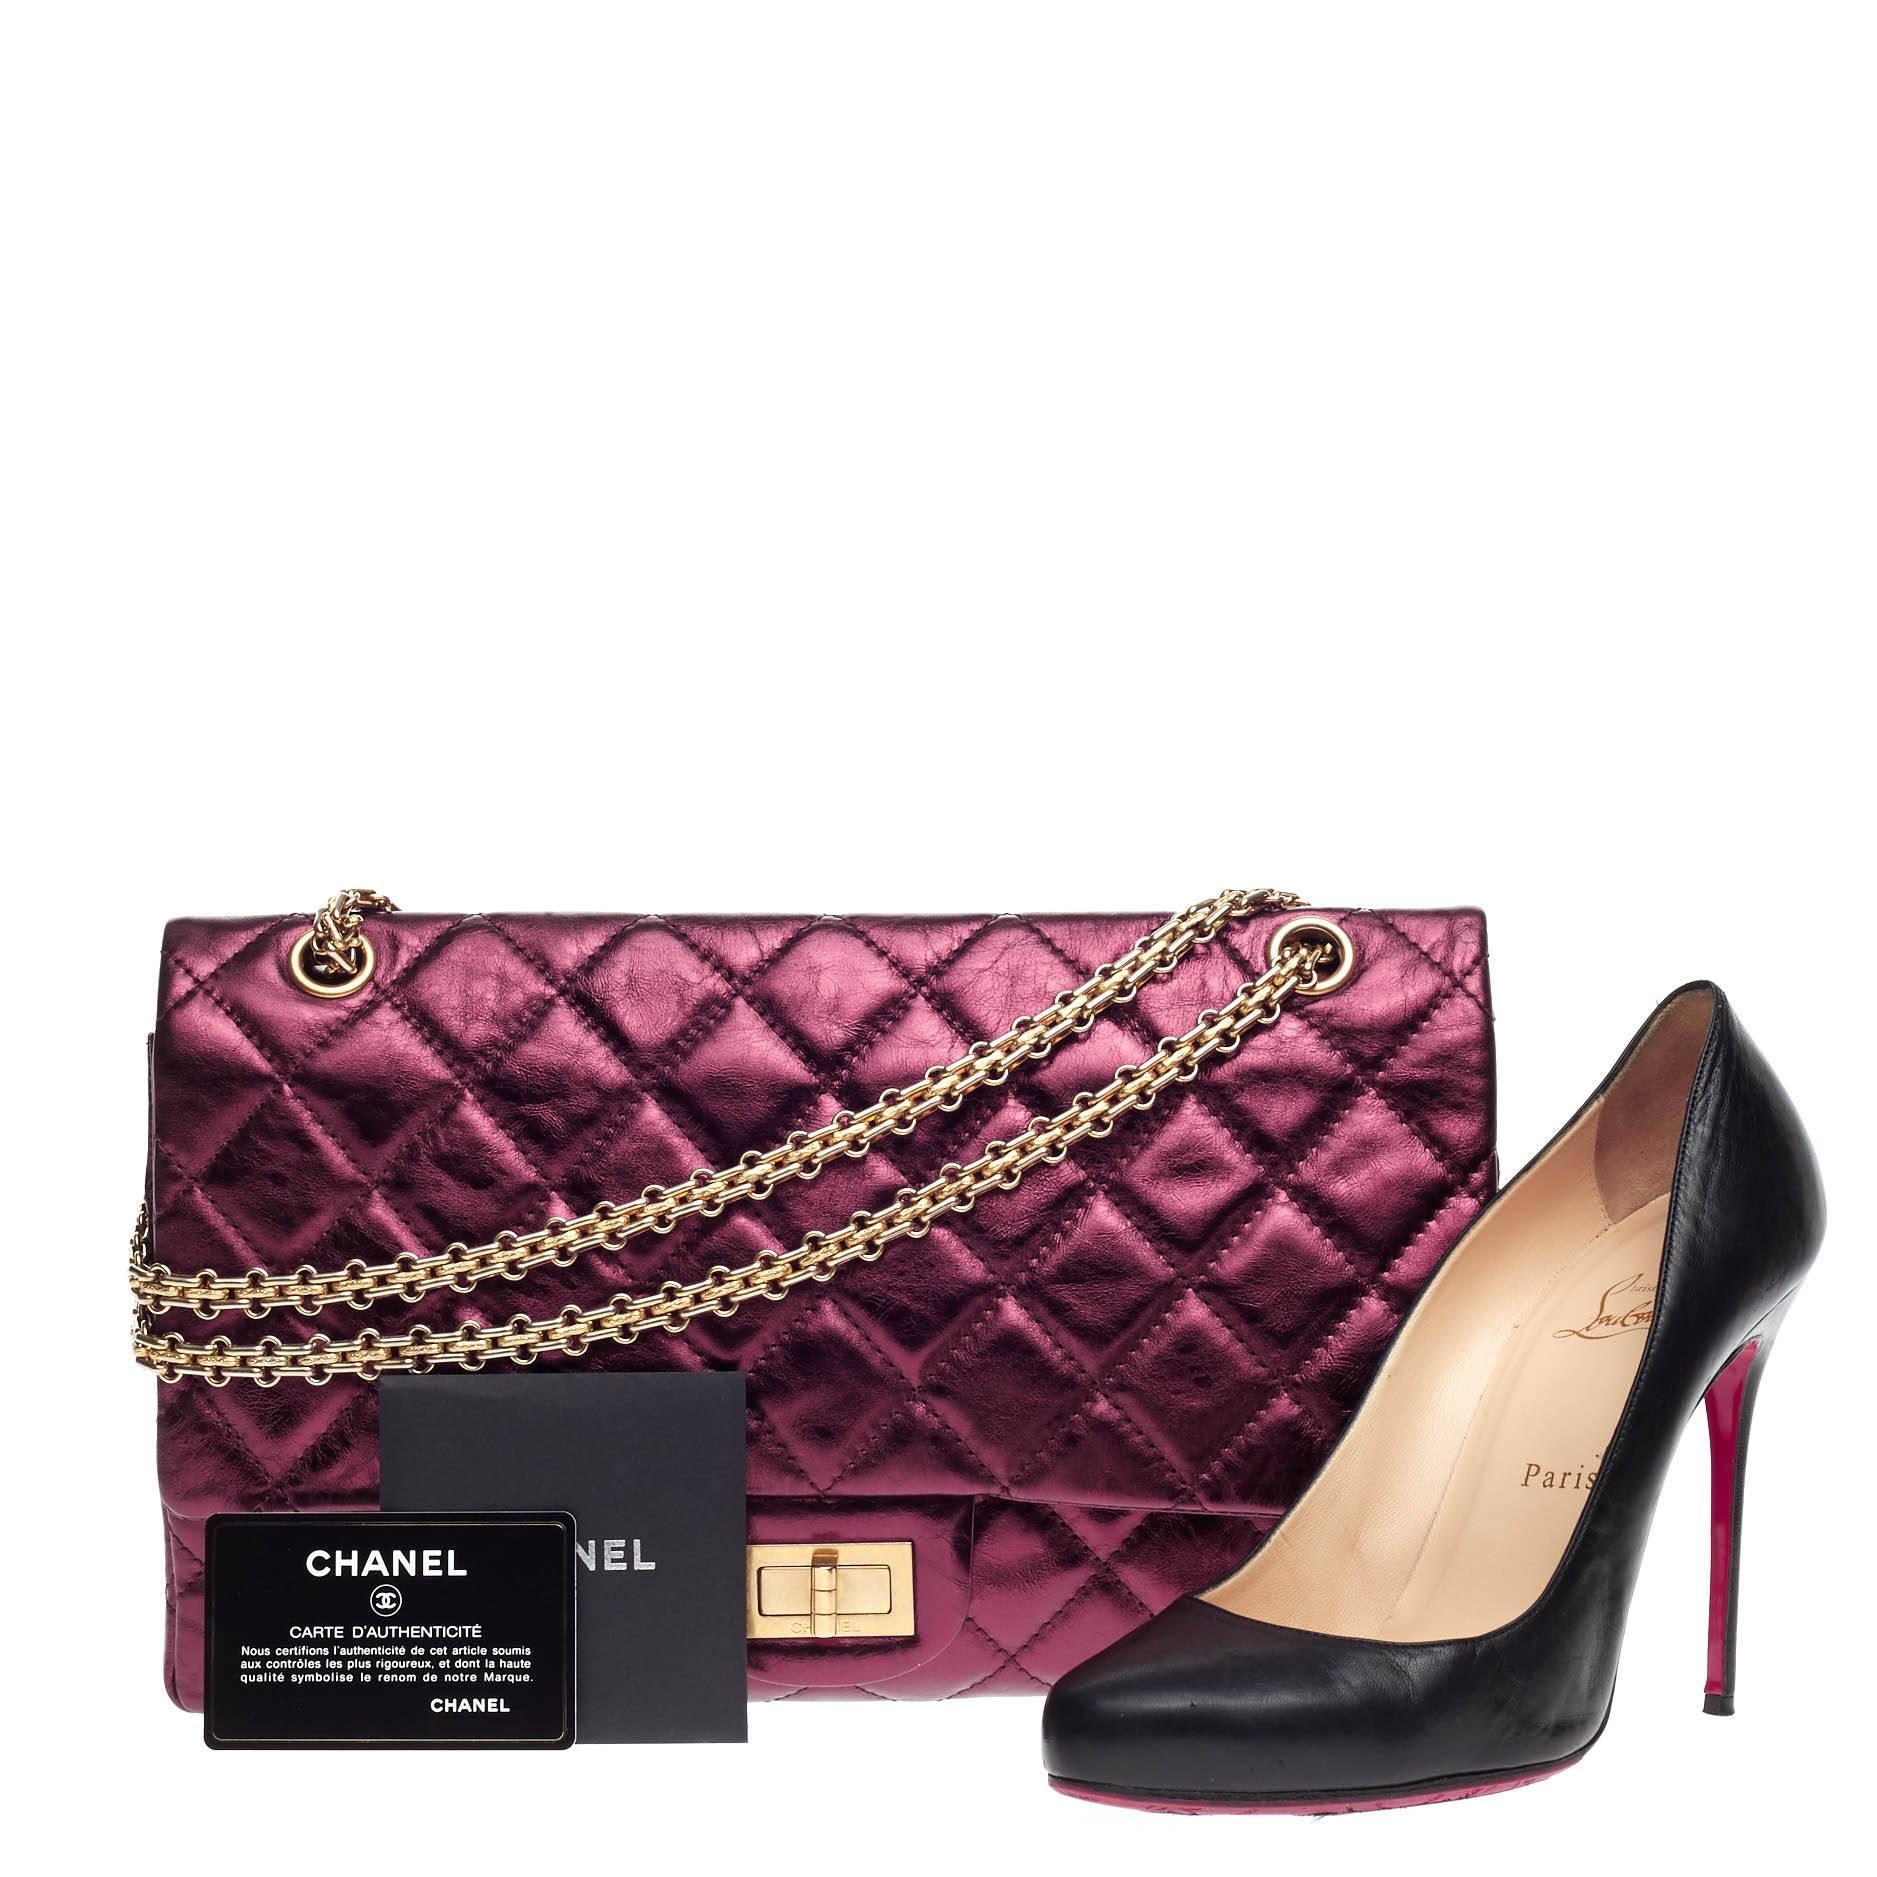 This authentic Chanel Reissue 2.55 Quilted Aged Calfskin 227 is an elegant and timeless piece to add to any collection. Crafted from supple metallic dark red calfskin leather, this stand-out flap features signature diamond quilting, iconic Chanel